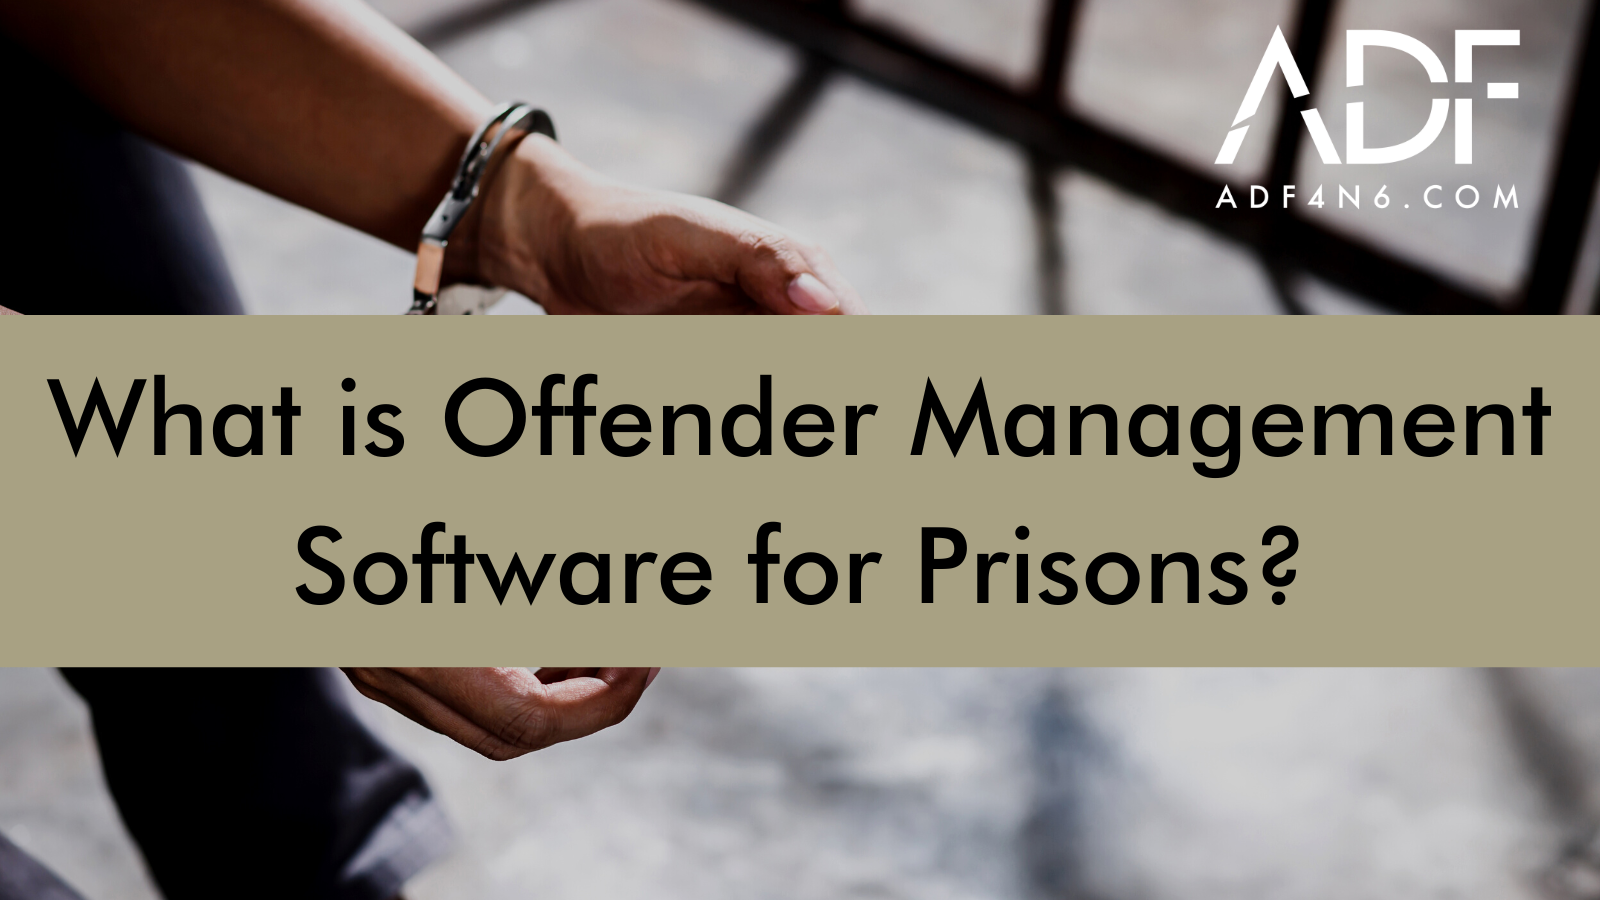 What is Offender Management Software for Prisons?